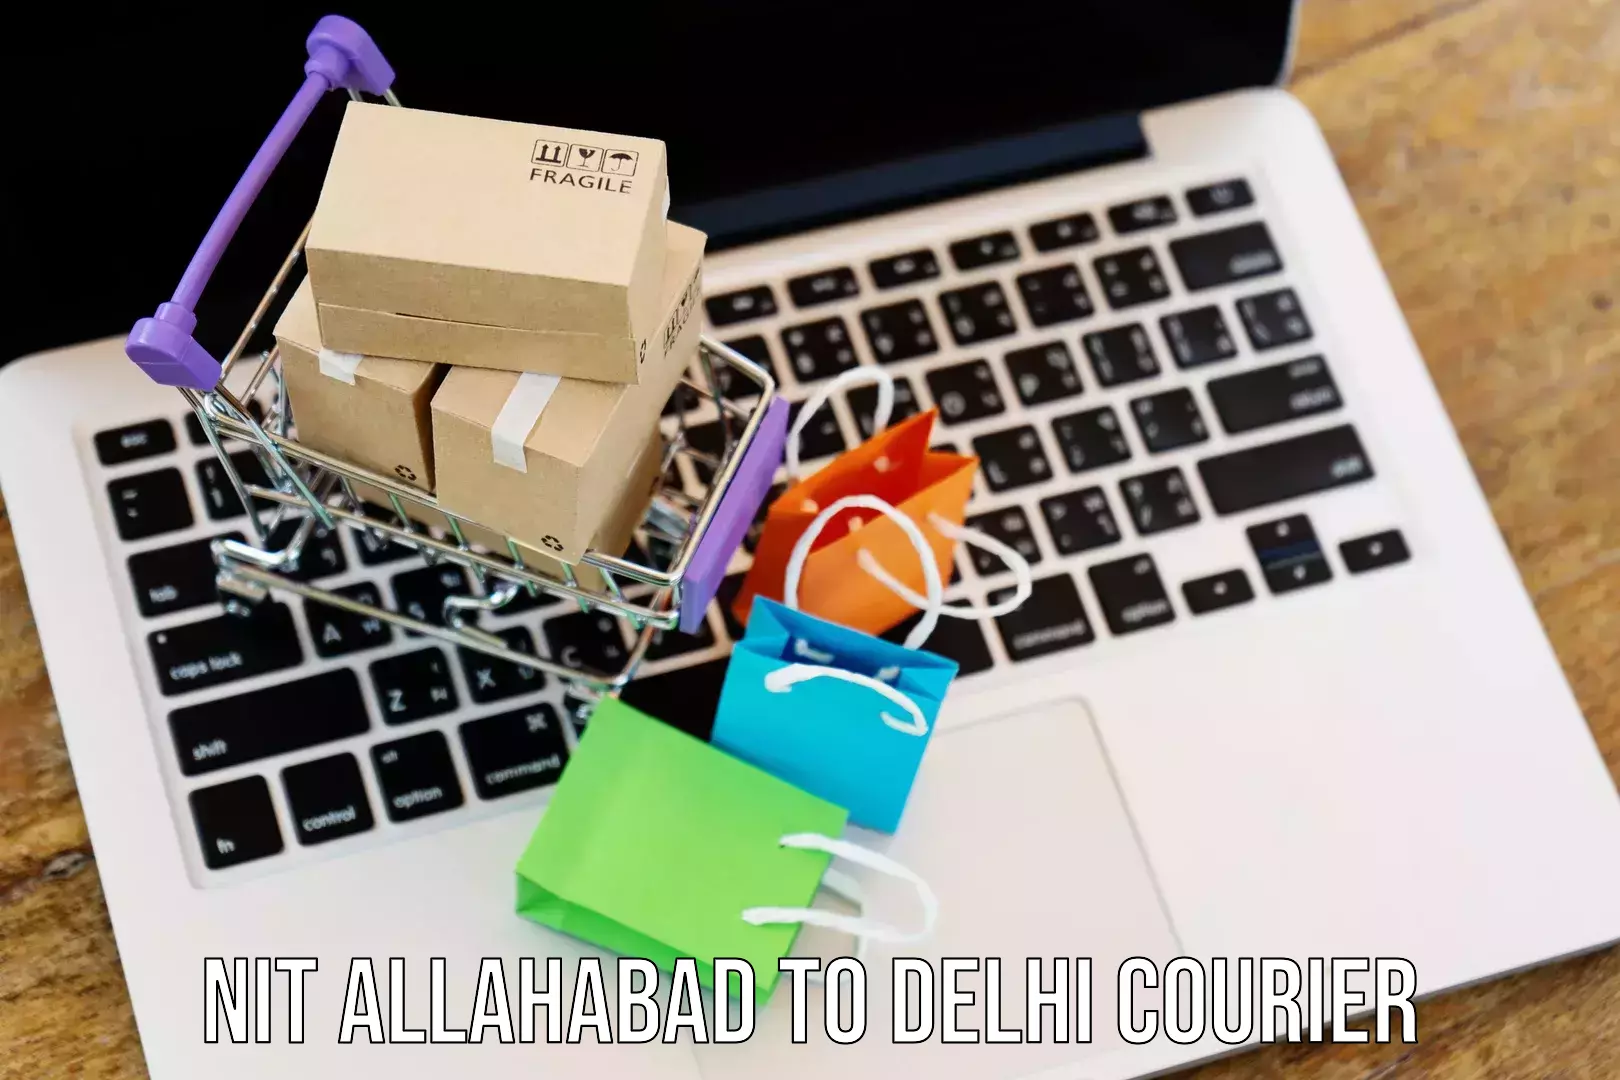 24-hour courier services NIT Allahabad to Krishna Nagar